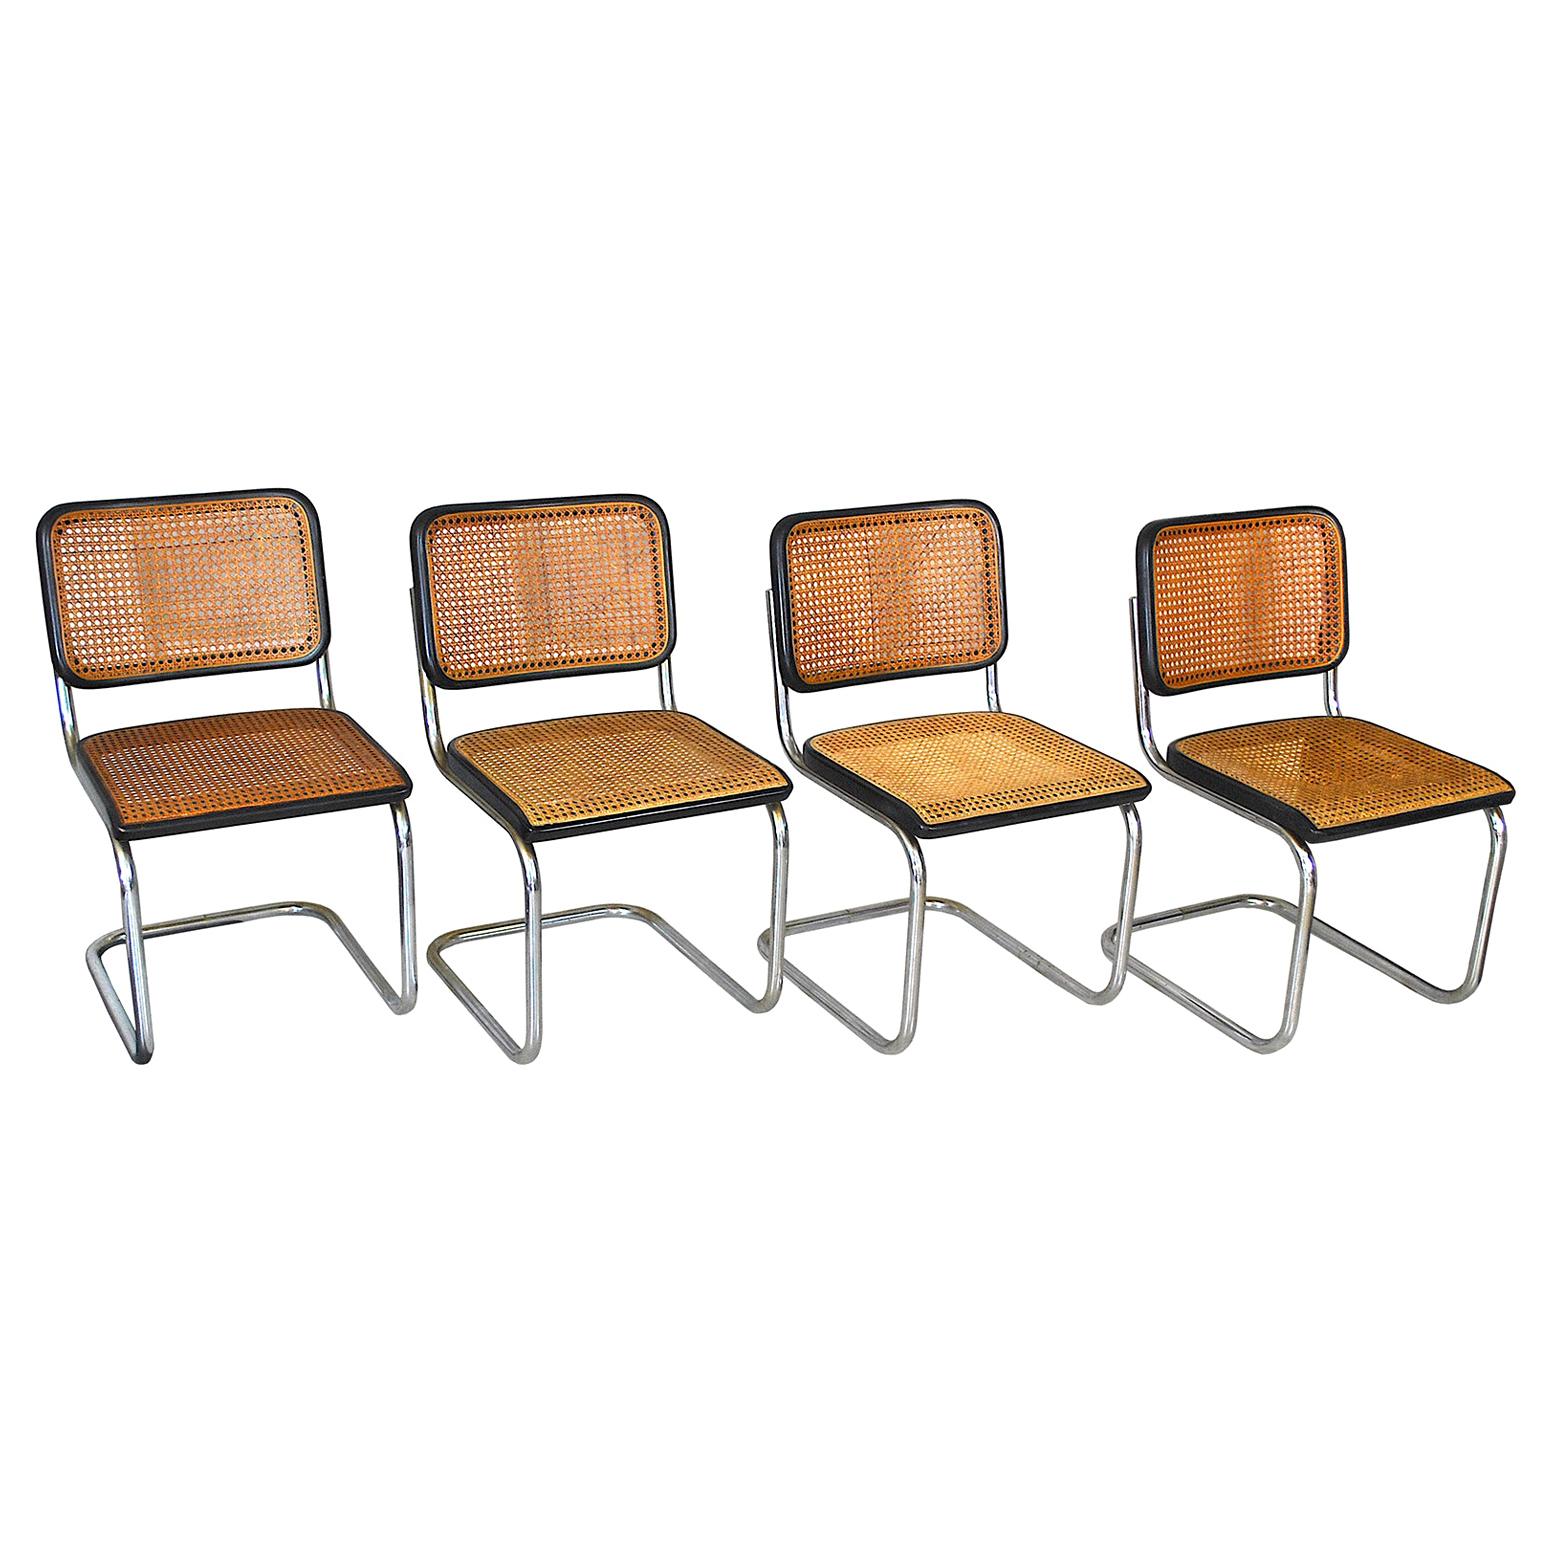 Marce Breur Midcentury Chairs Model Cesca by Thonet, 1970s